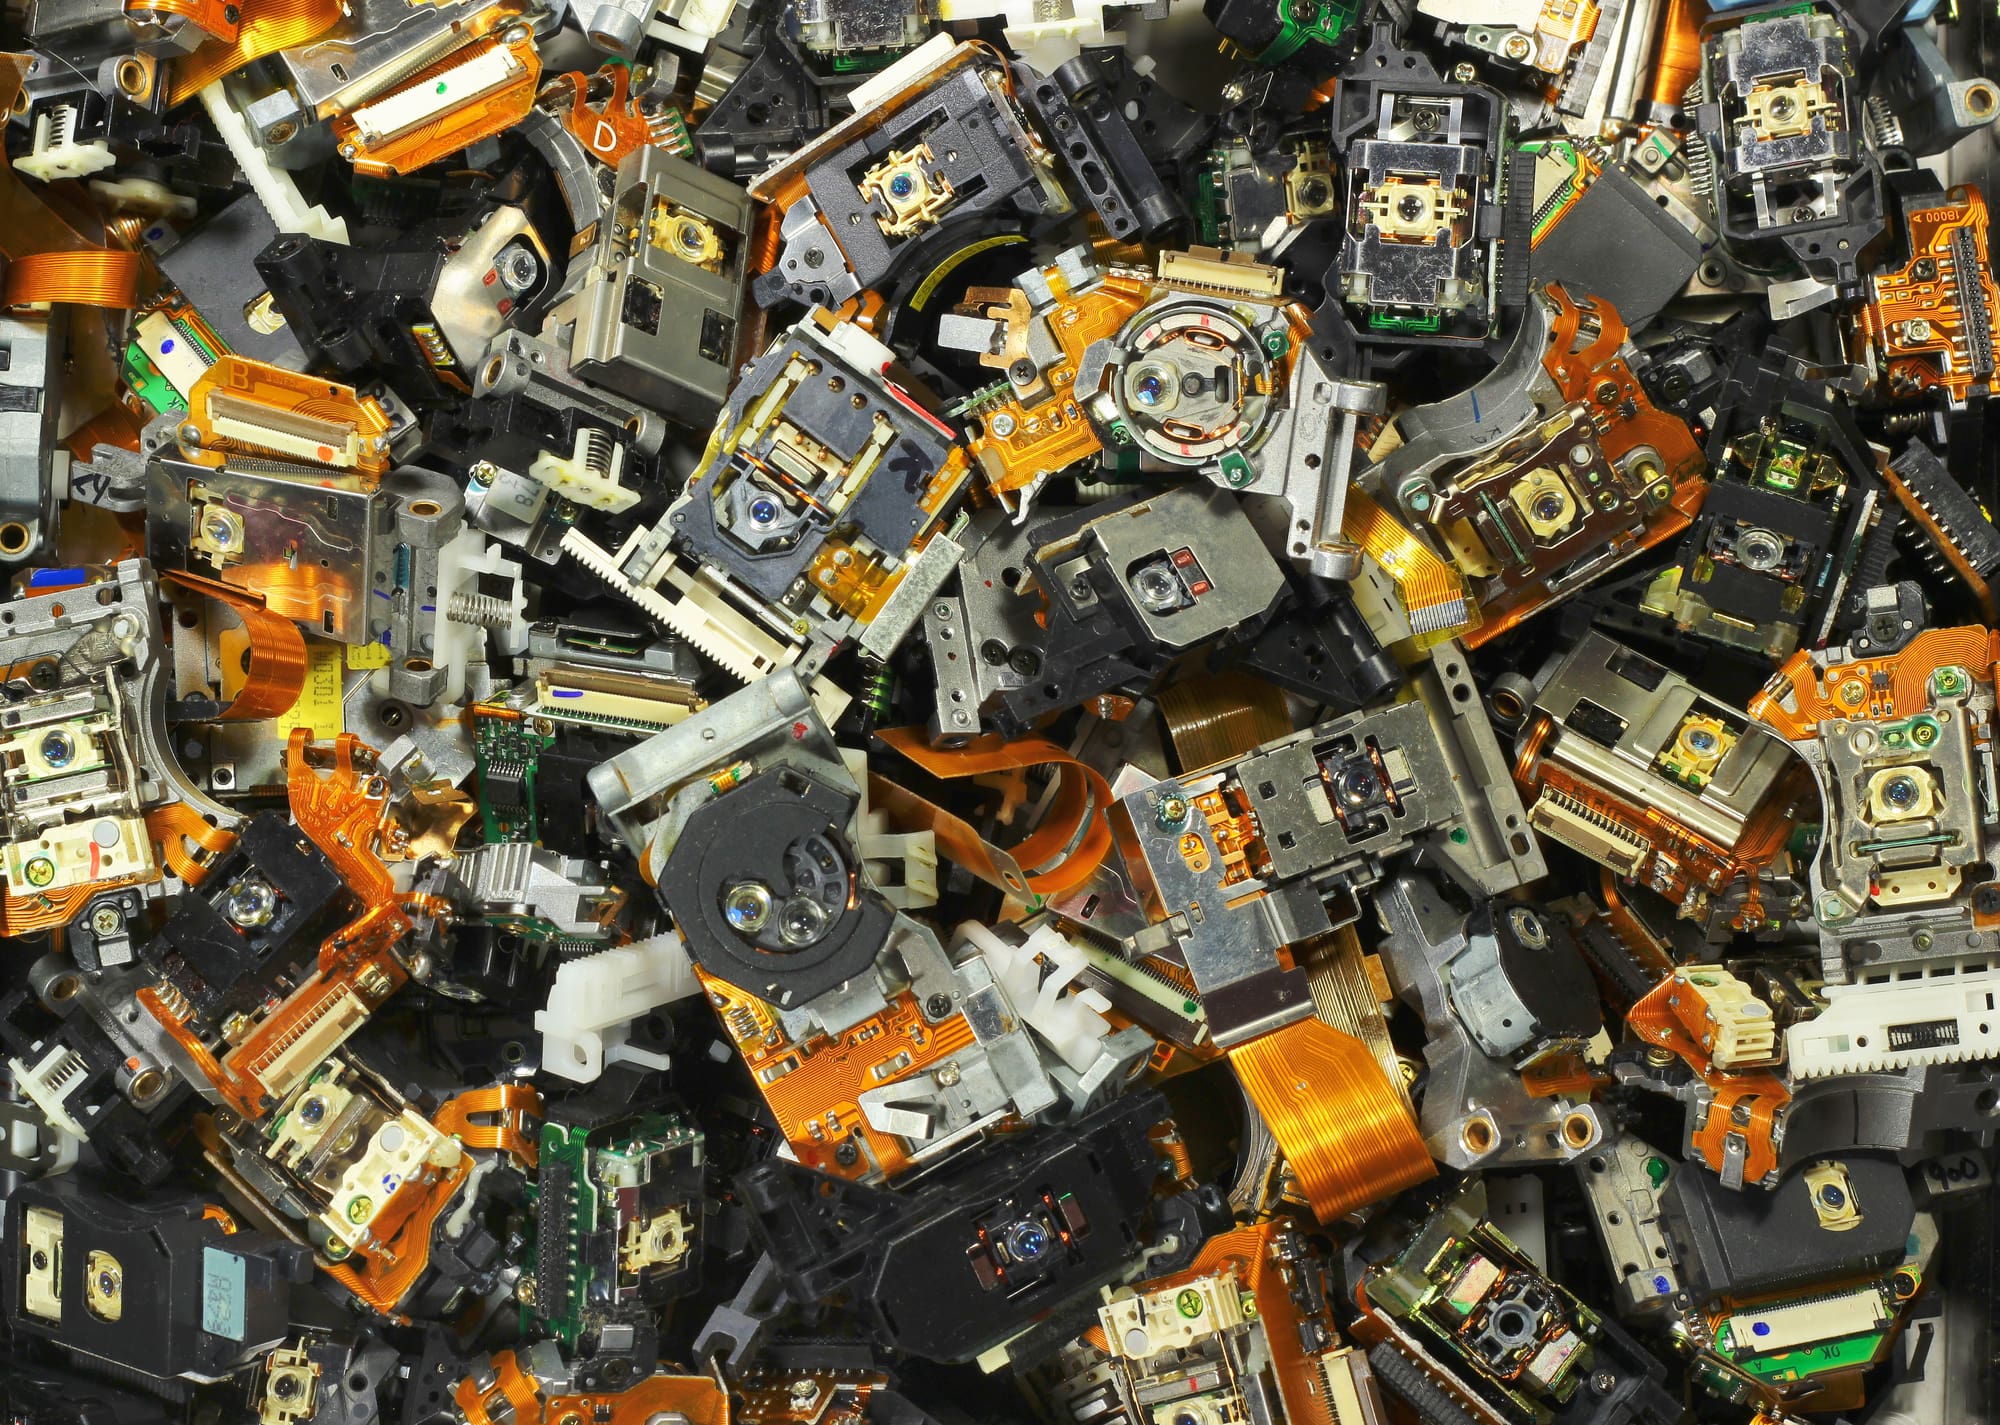 Making the Right Choice: How to Decide Between Recycling and Repairing Electronic Equipment